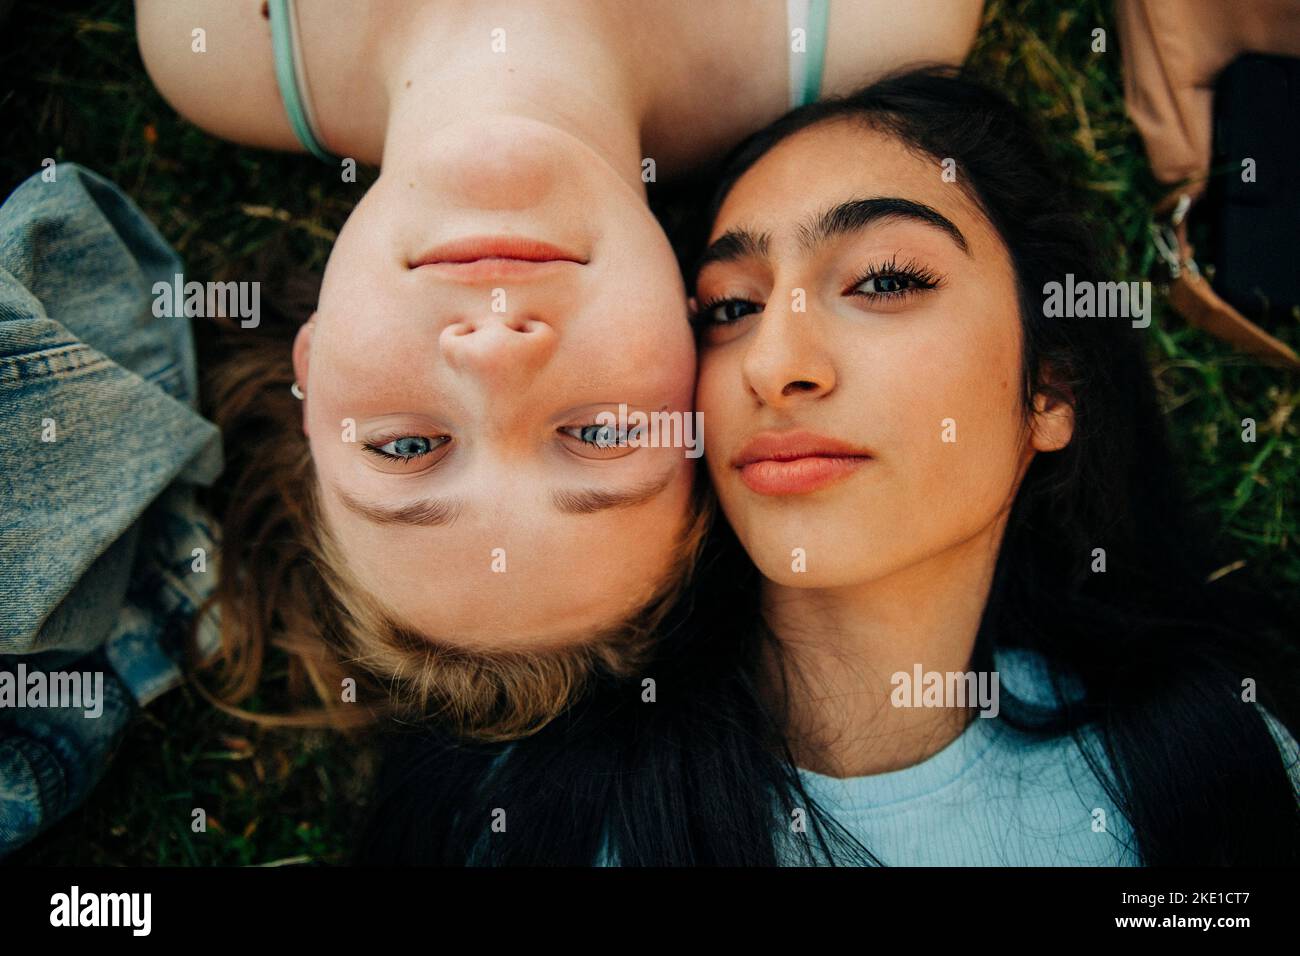 Teenage girls lying together at park Stock Photo